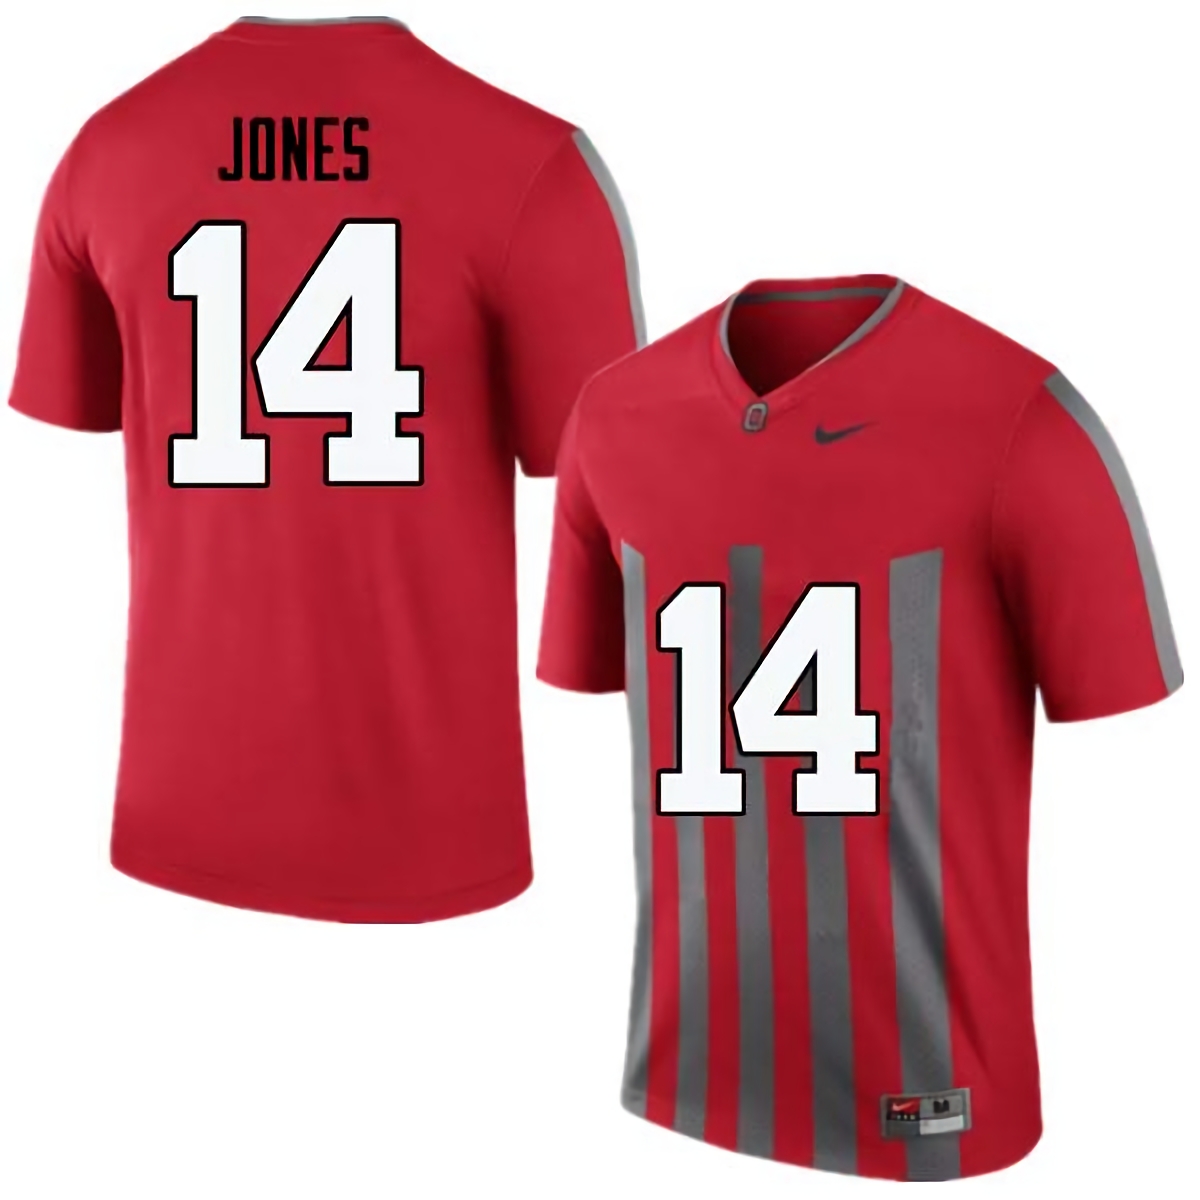 Keandre Jones Ohio State Buckeyes Men's NCAA #14 Nike Throwback Red College Stitched Football Jersey IVP0356GX